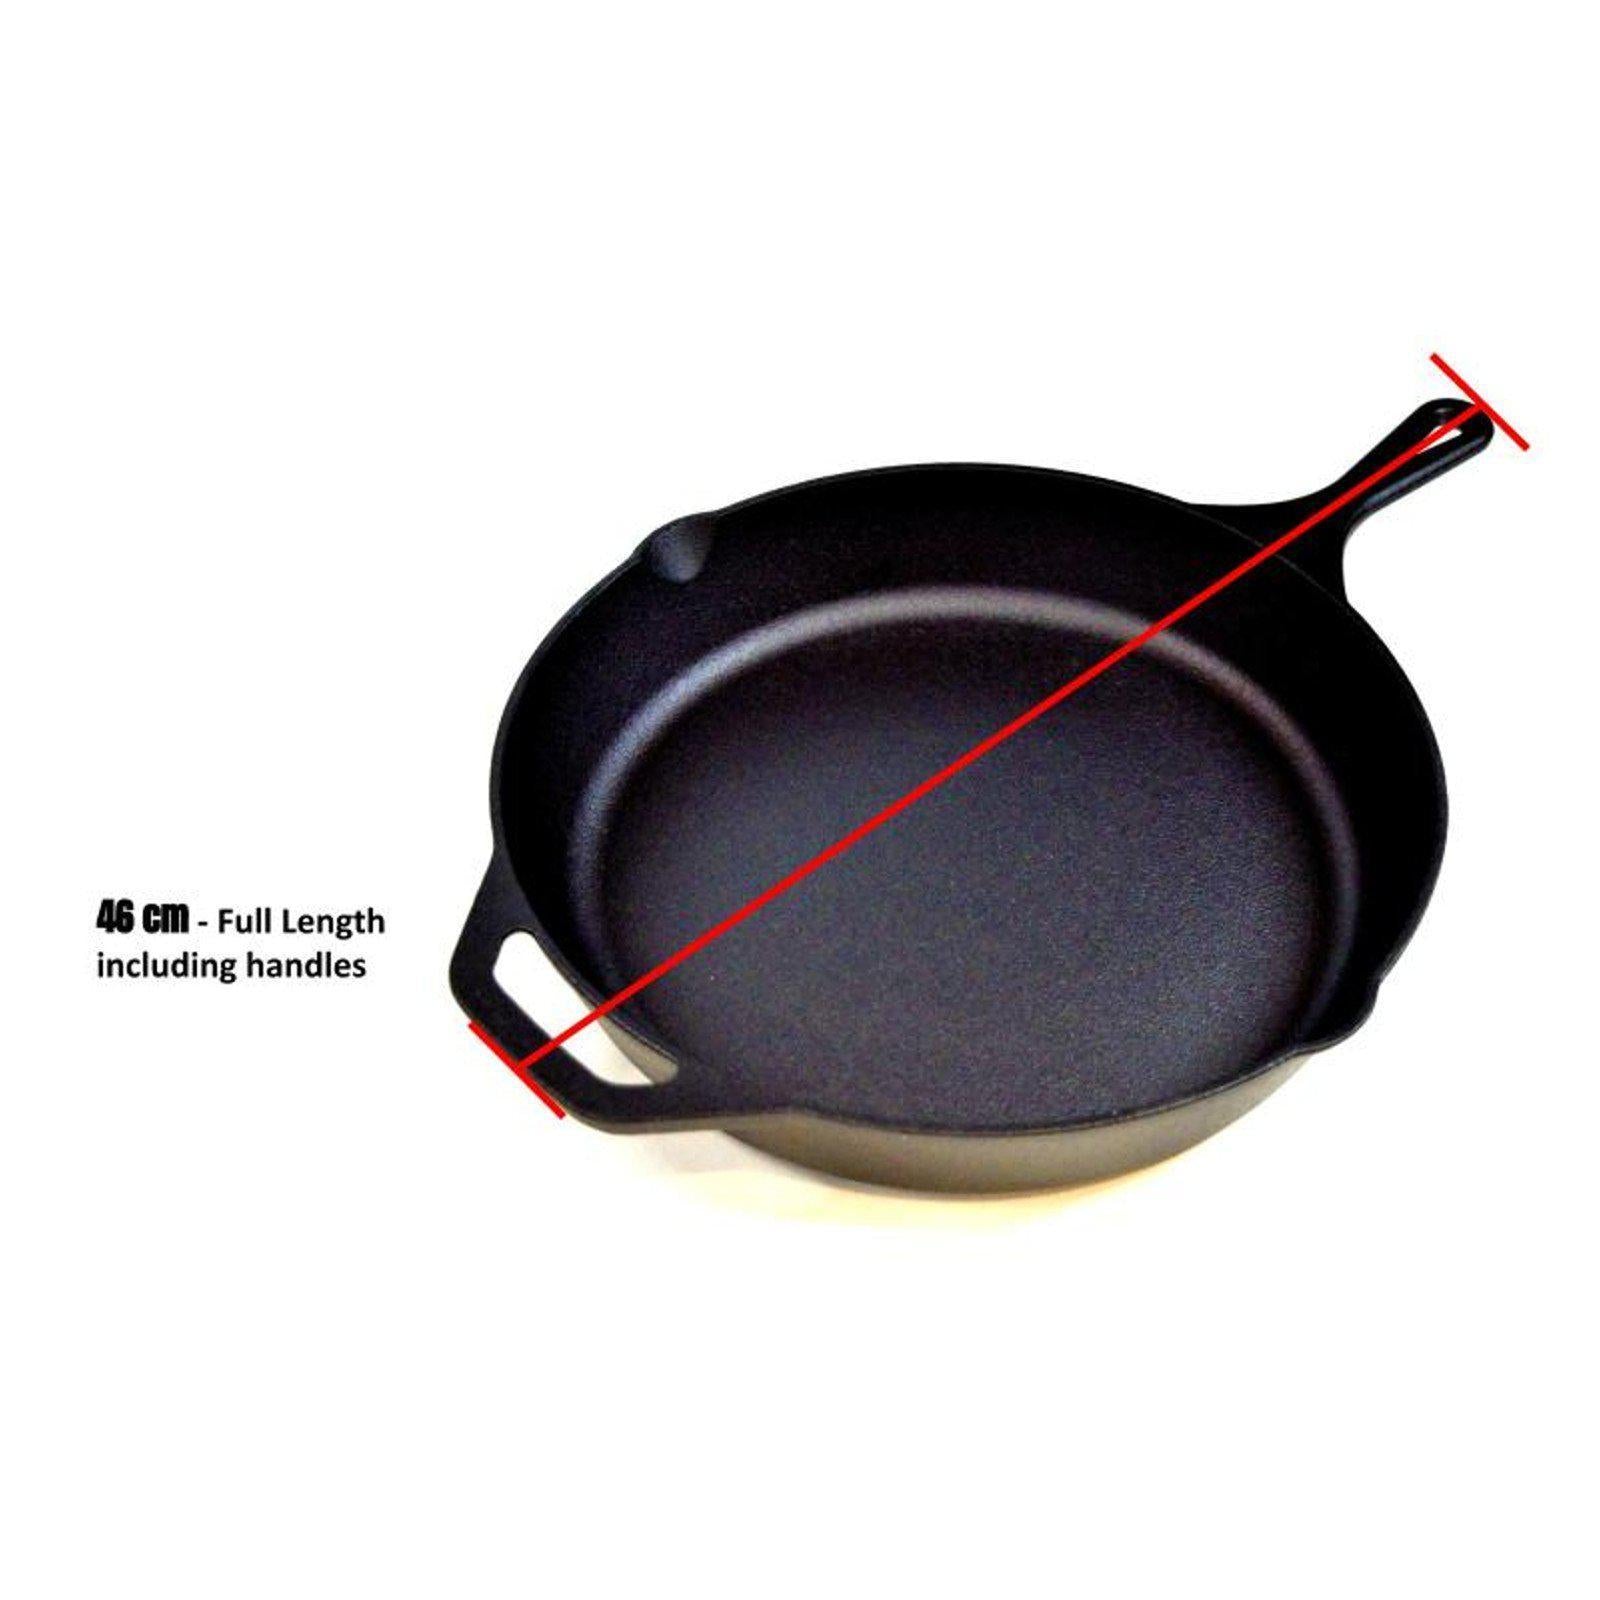 Chef's Quality Black Cast Iron Skillet - Large 30cm Cooking Surface-Frying Pan-Chef's Quality Cookware